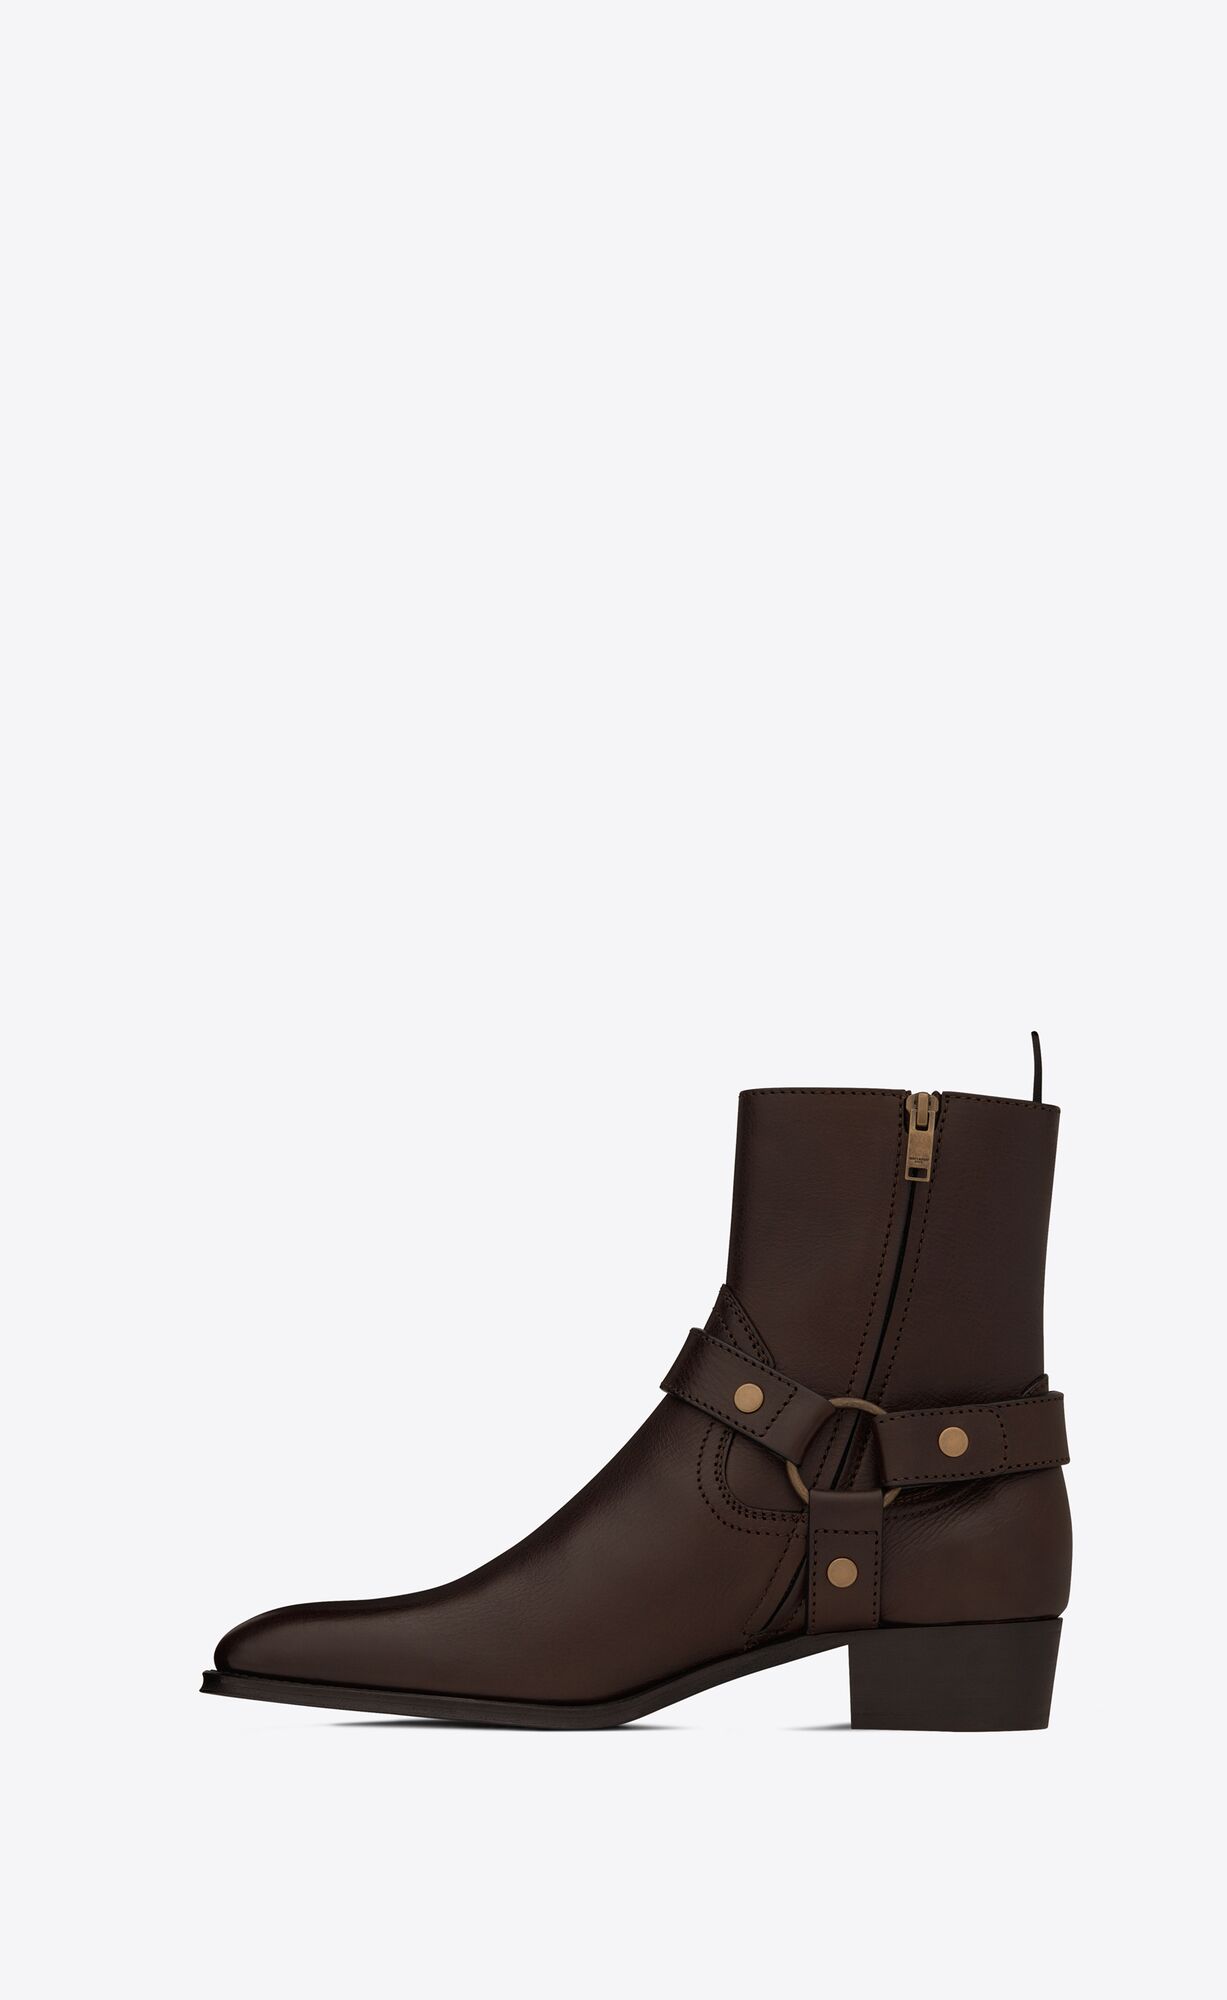 WYATT harness boots in smooth leather | Saint Laurent | YSL.com